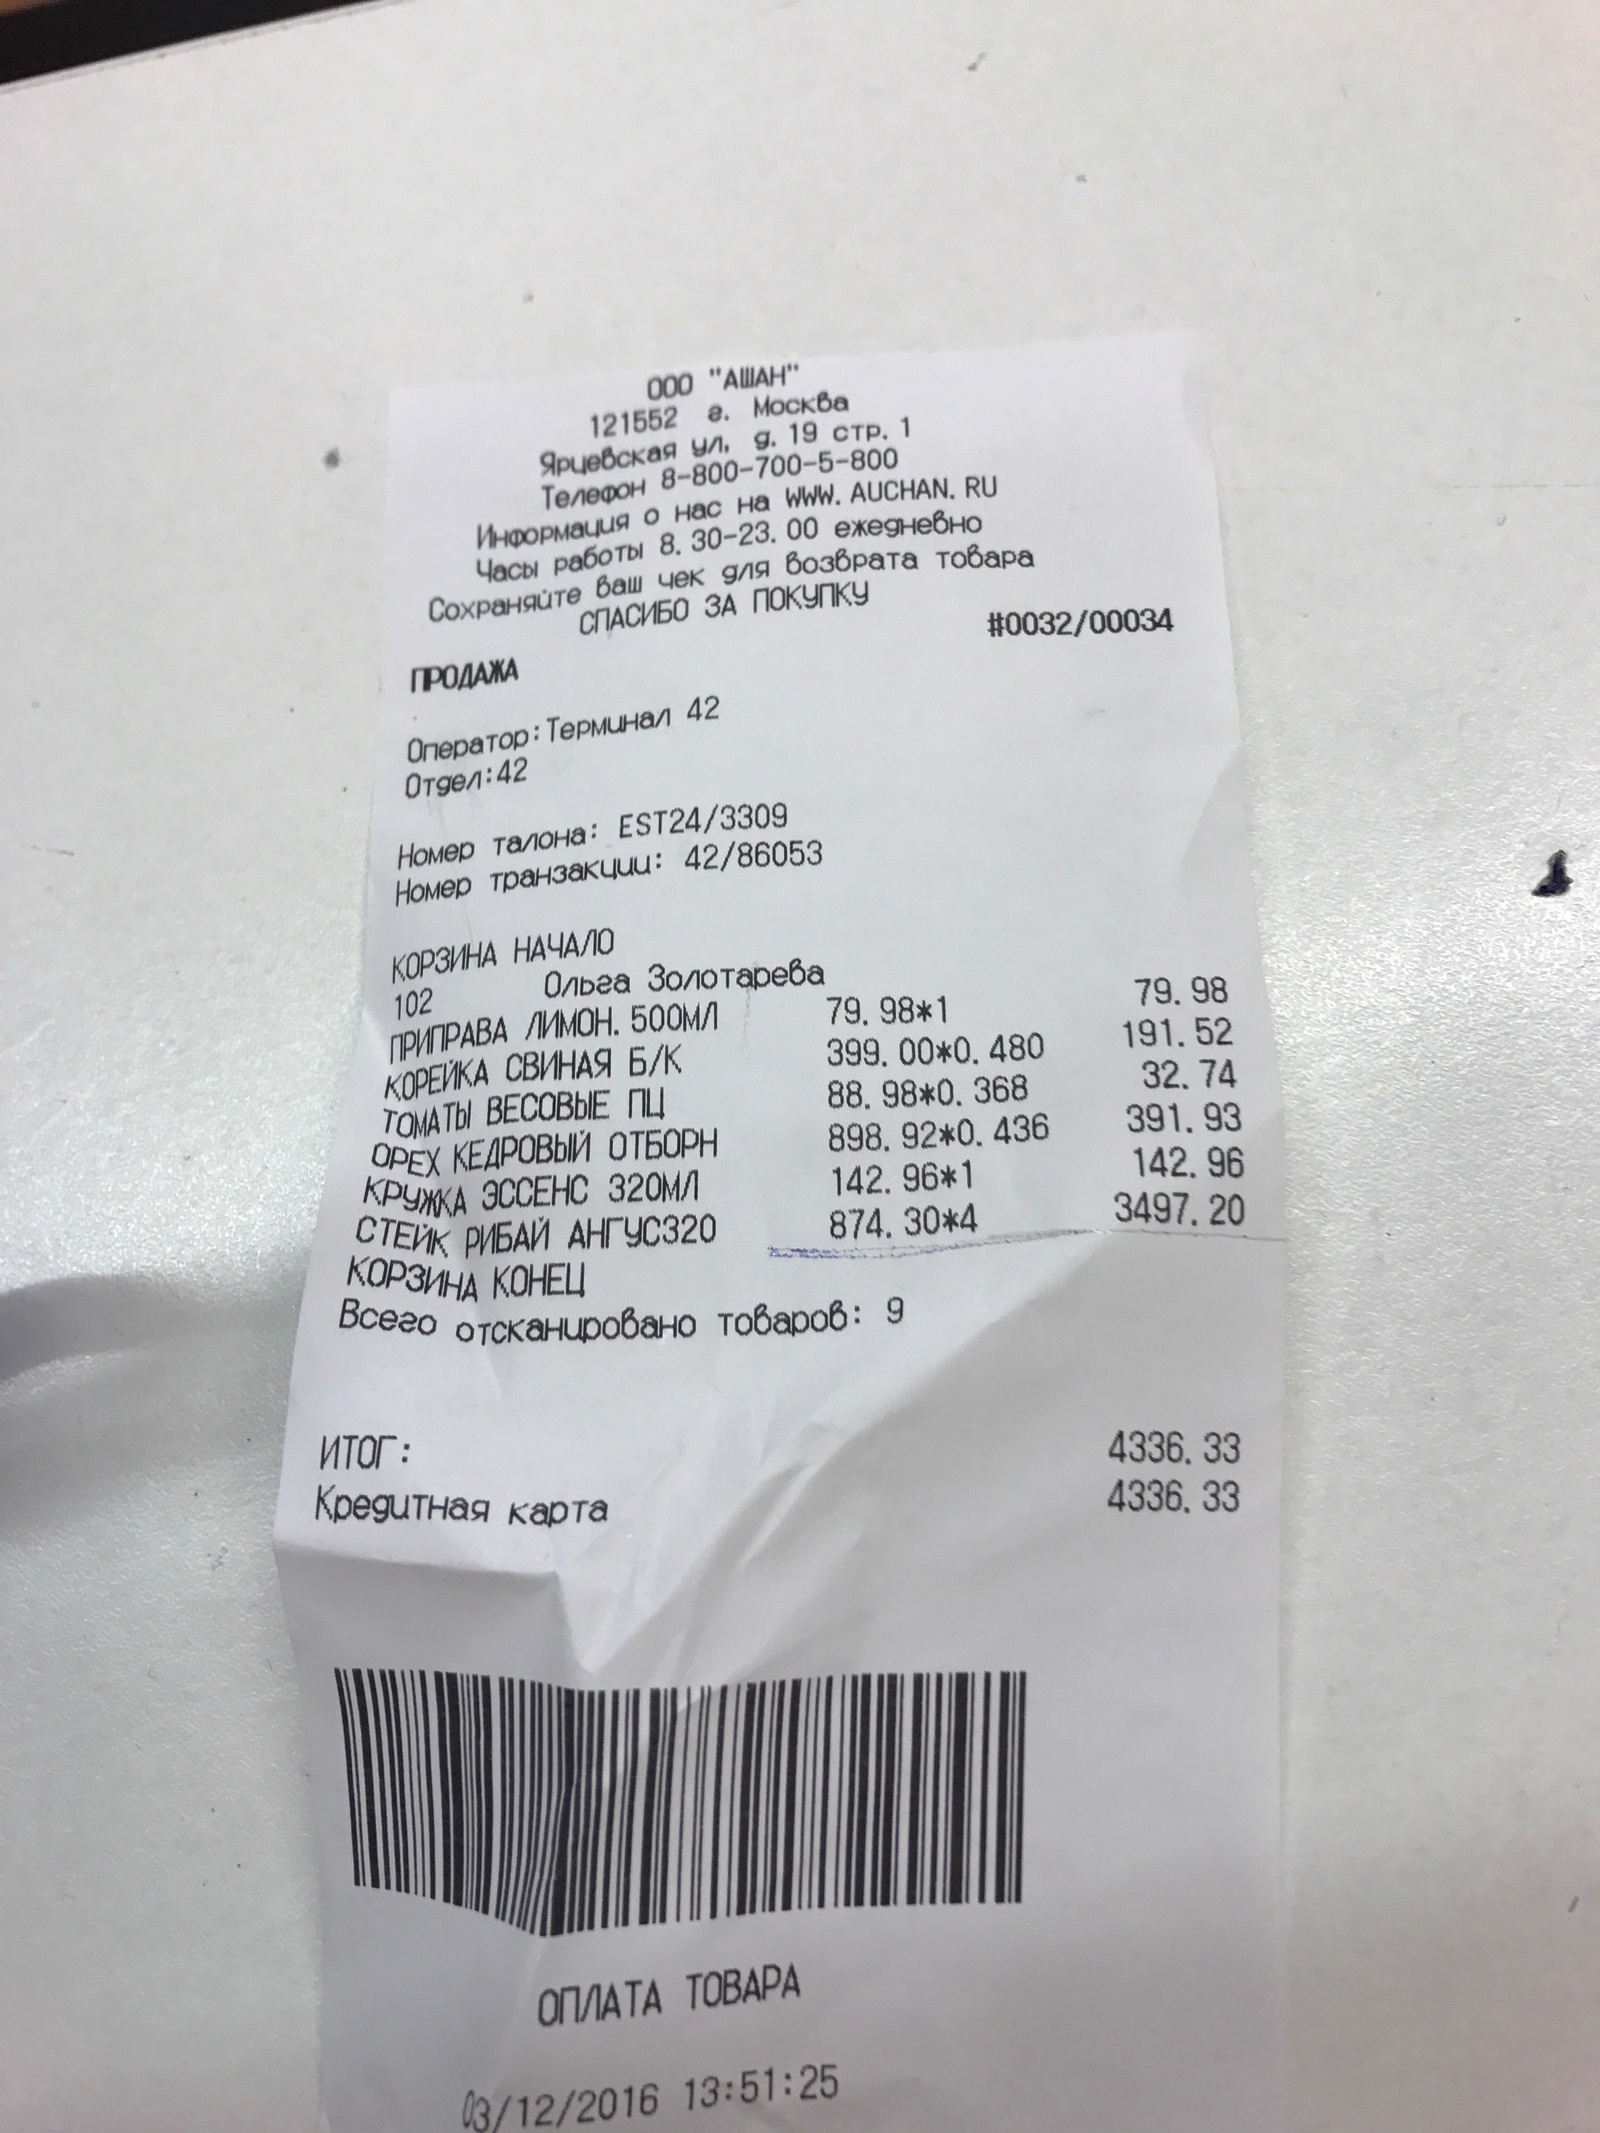 Deception with price tags in Auchan - My, Auchan, Price tag, Deception, Longpost